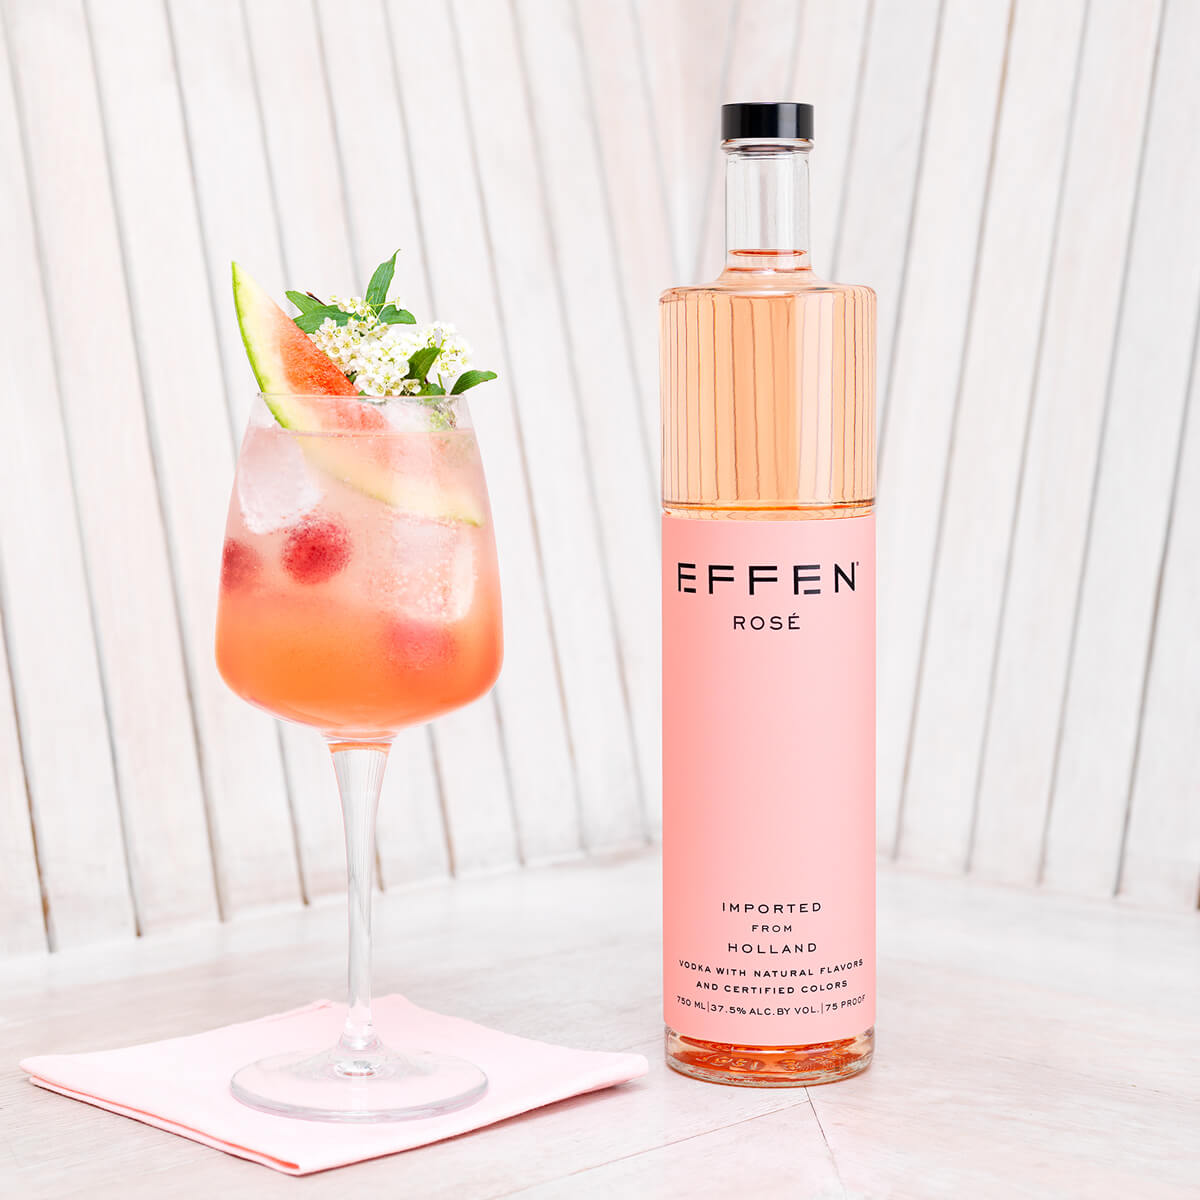 EFFEN rose vodka makes your life more colorful.